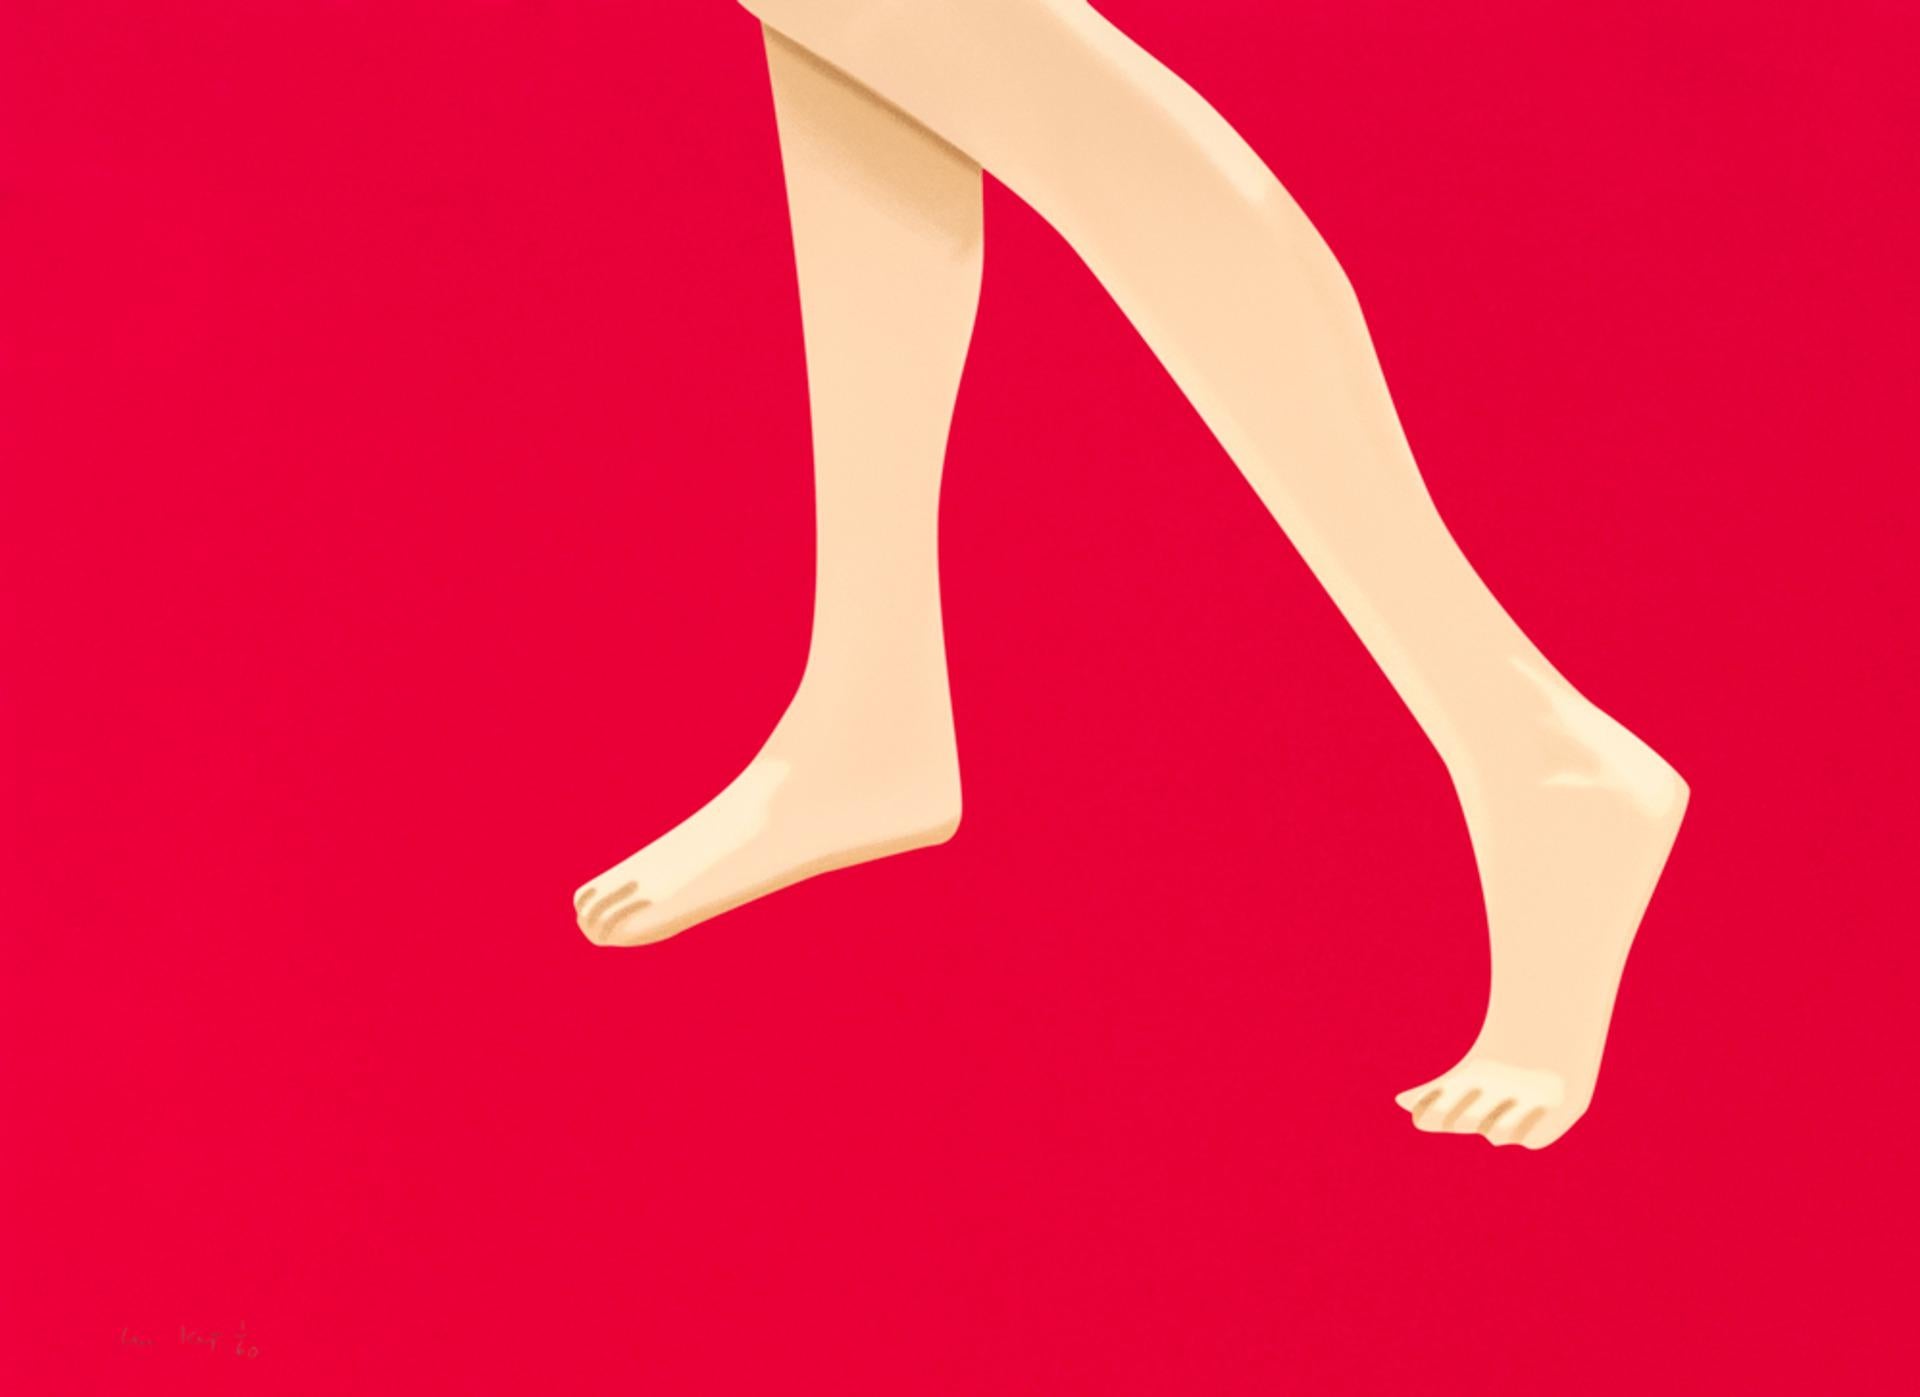 COCA-COLA GIRL 8 (AP 19 of 20/Aside from the regular Edition of 60) - Print by Alex Katz (b. 1927)